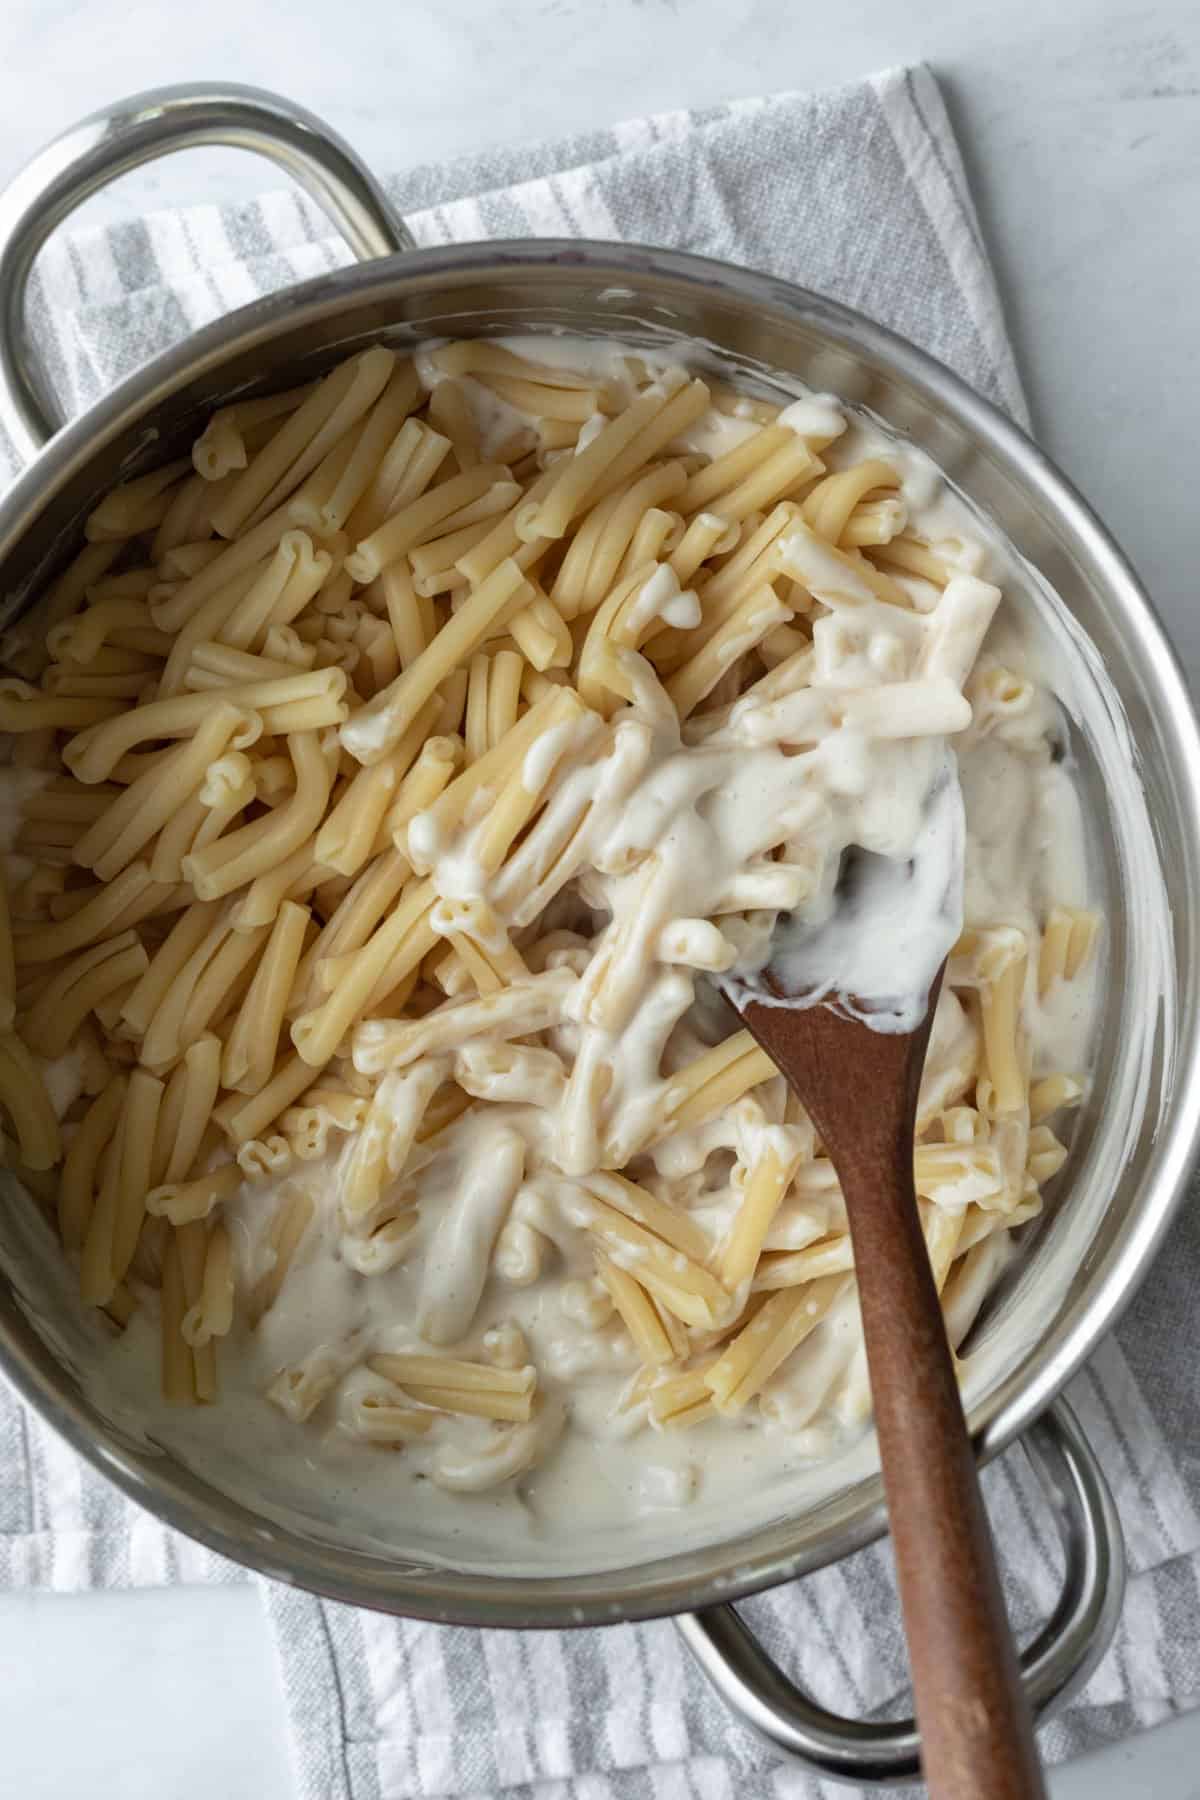 tossing pasta with creamy sauce in pot.